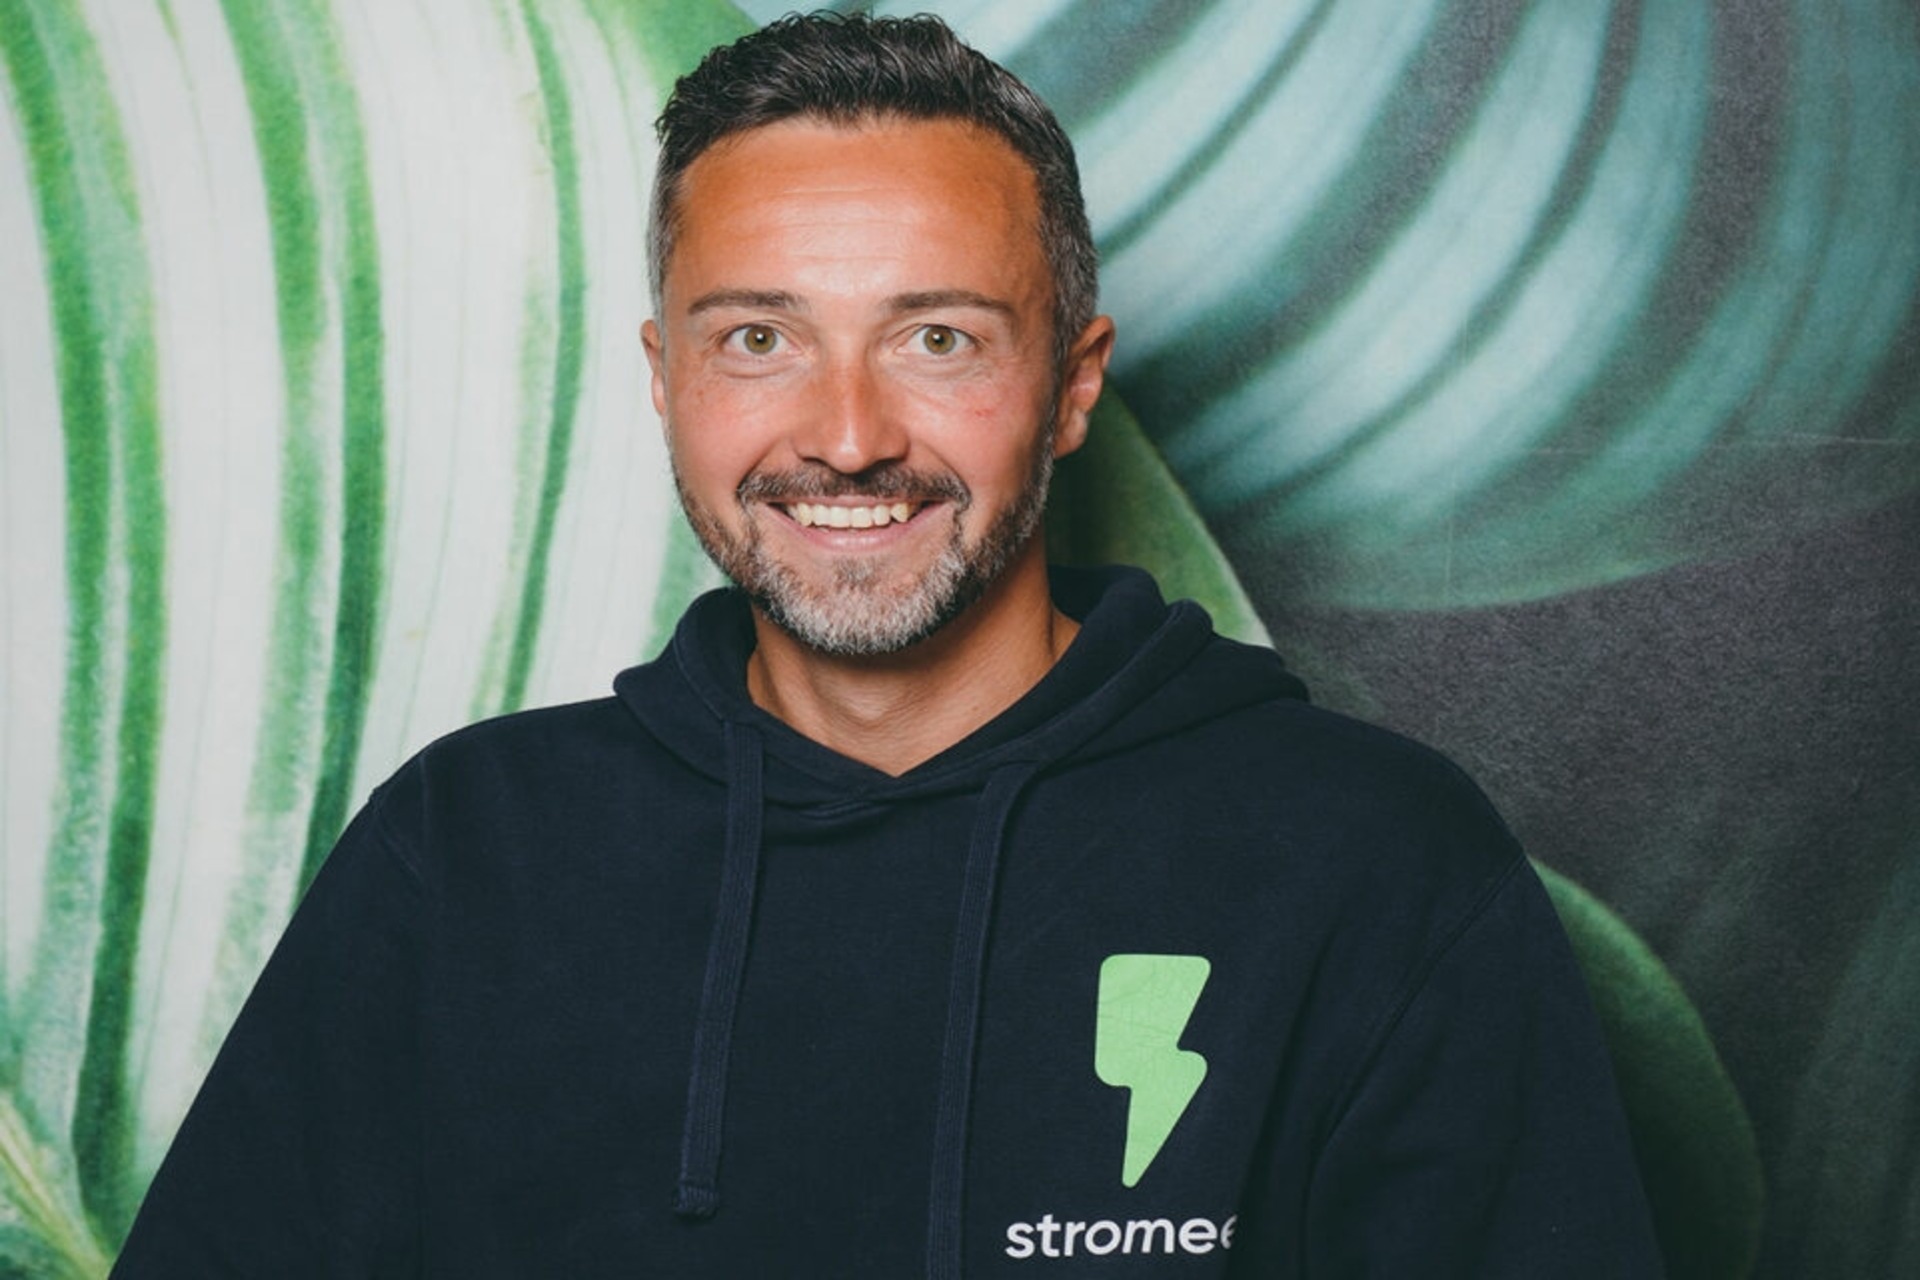 Germany: Mario Weißensteiner is co-founder and co-CEO of Stromee